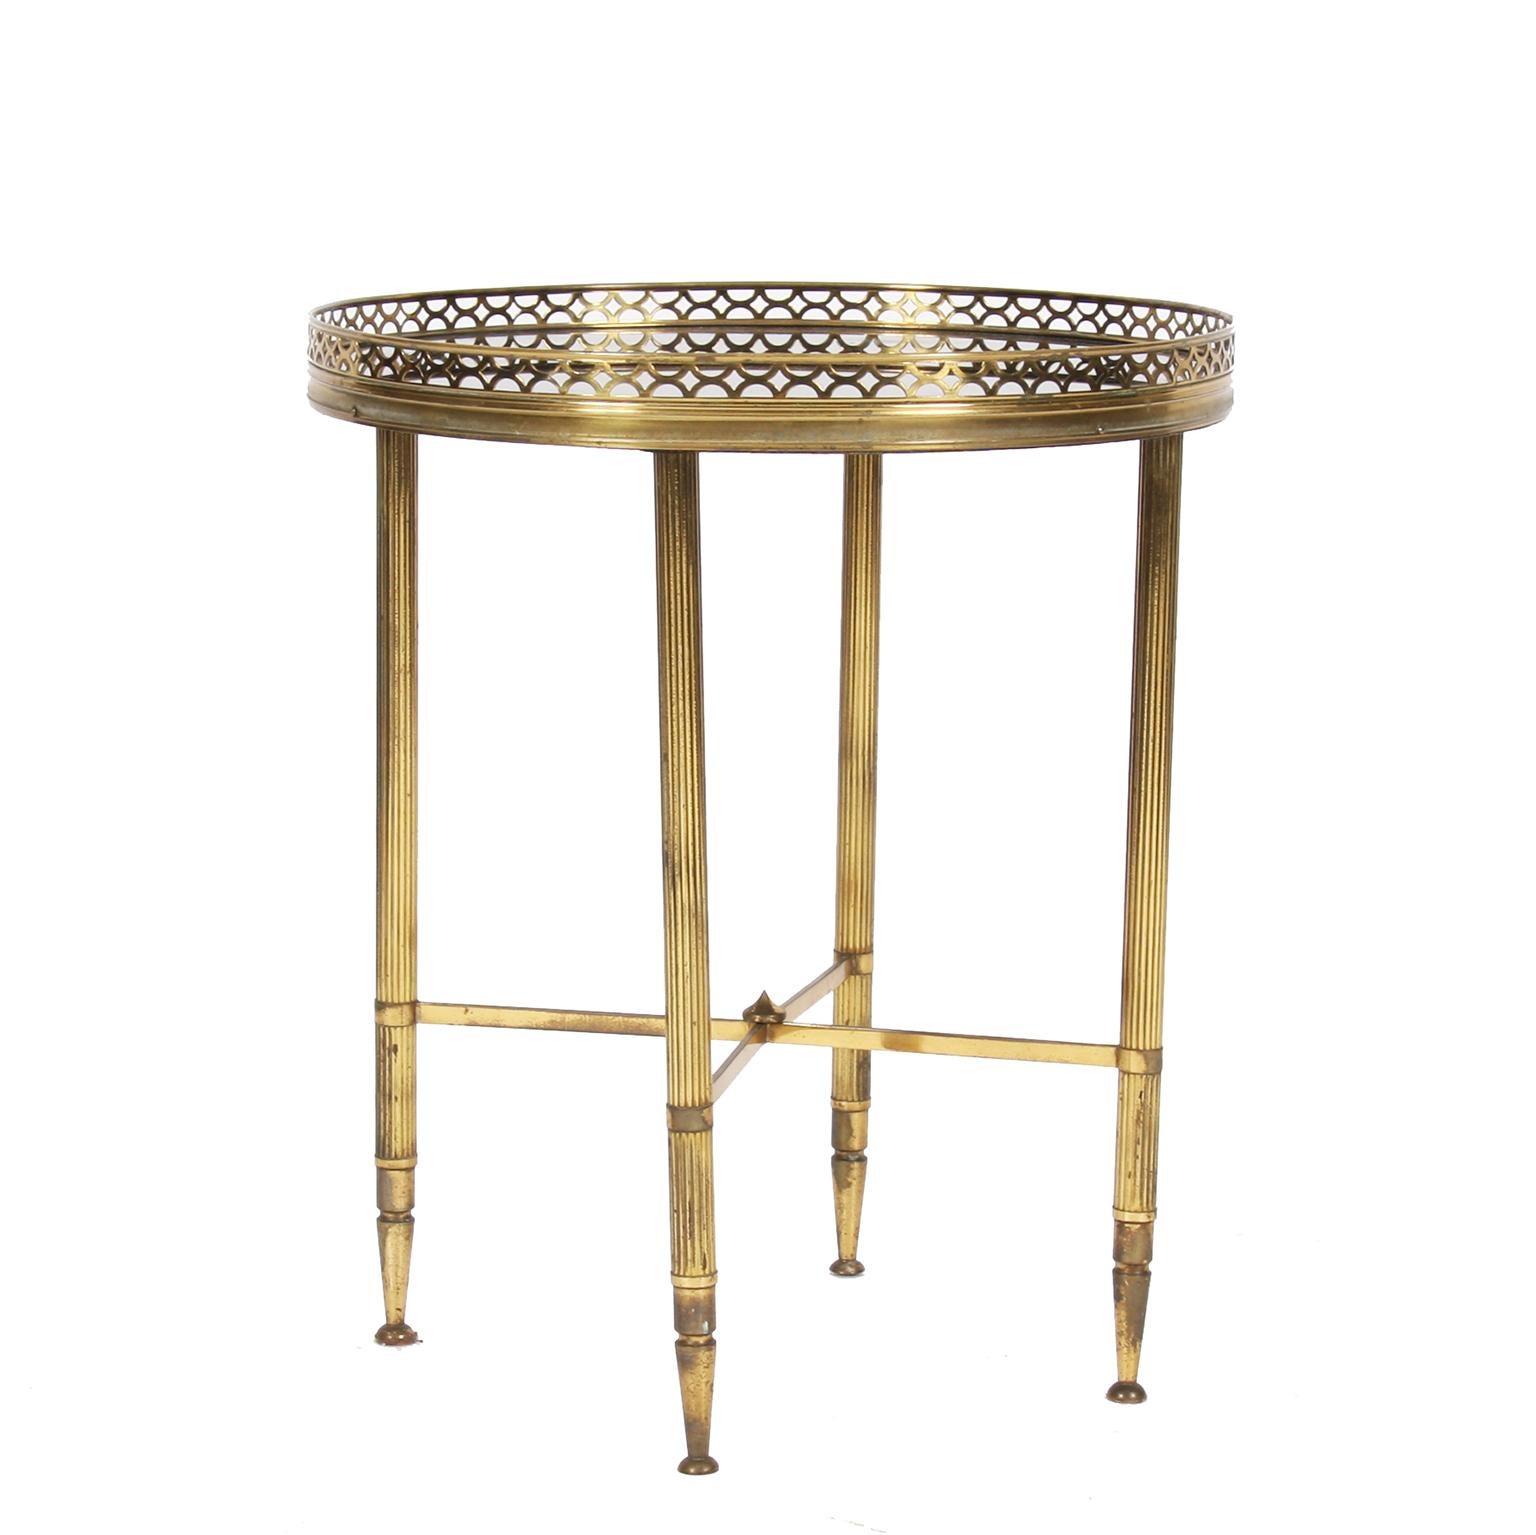 French, 1960s

A beautifully chic, galleried, side table with fluted legs and black glass. 

Elegant and useful. Excellent quality.